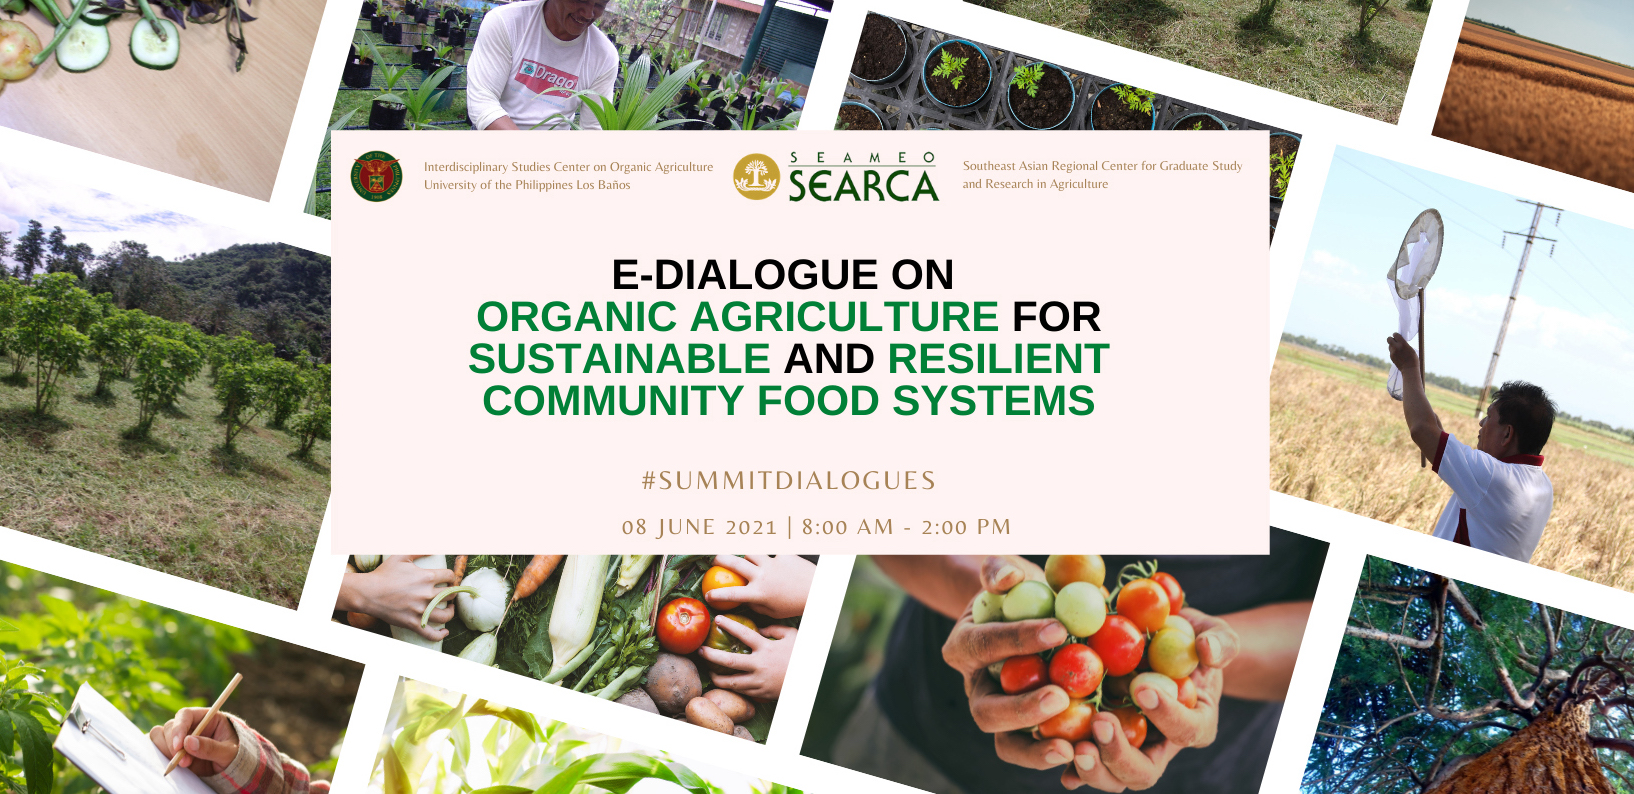 E-Dialogue On Organic Agriculture For Sustainable And Resilient Community Food Systems